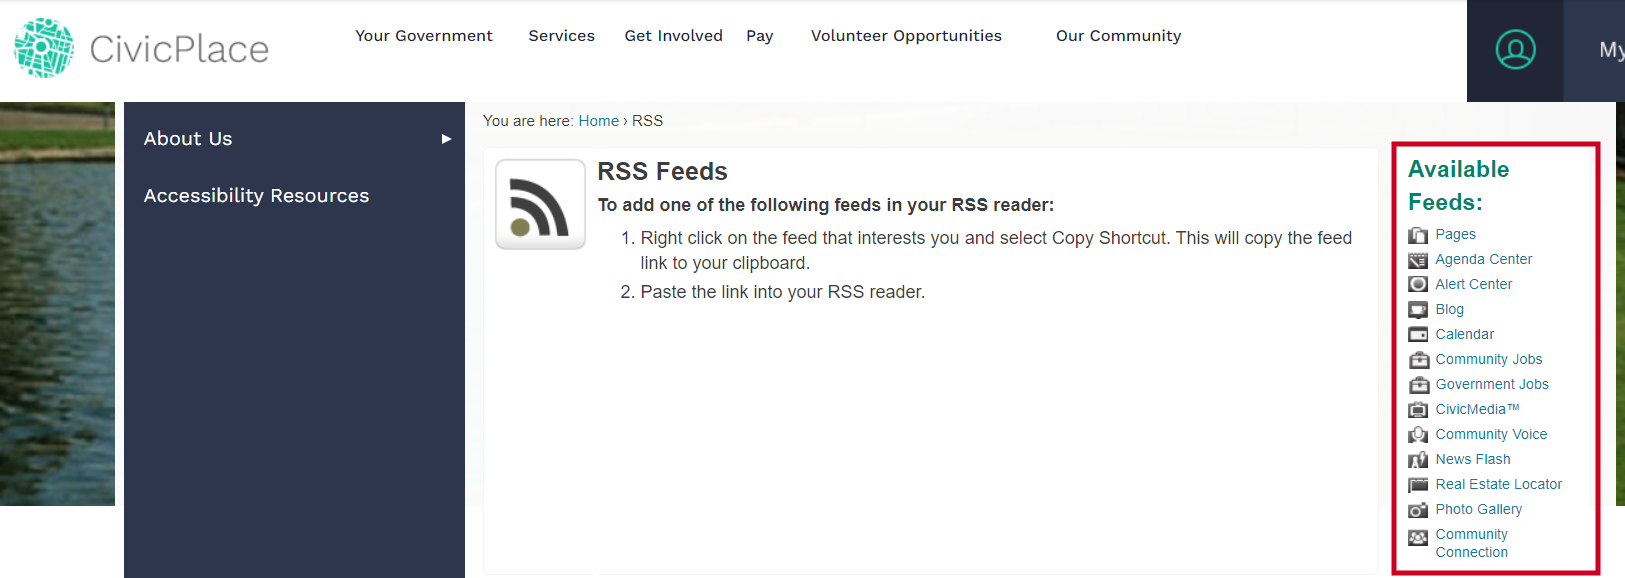 The list of available RSS feeds.